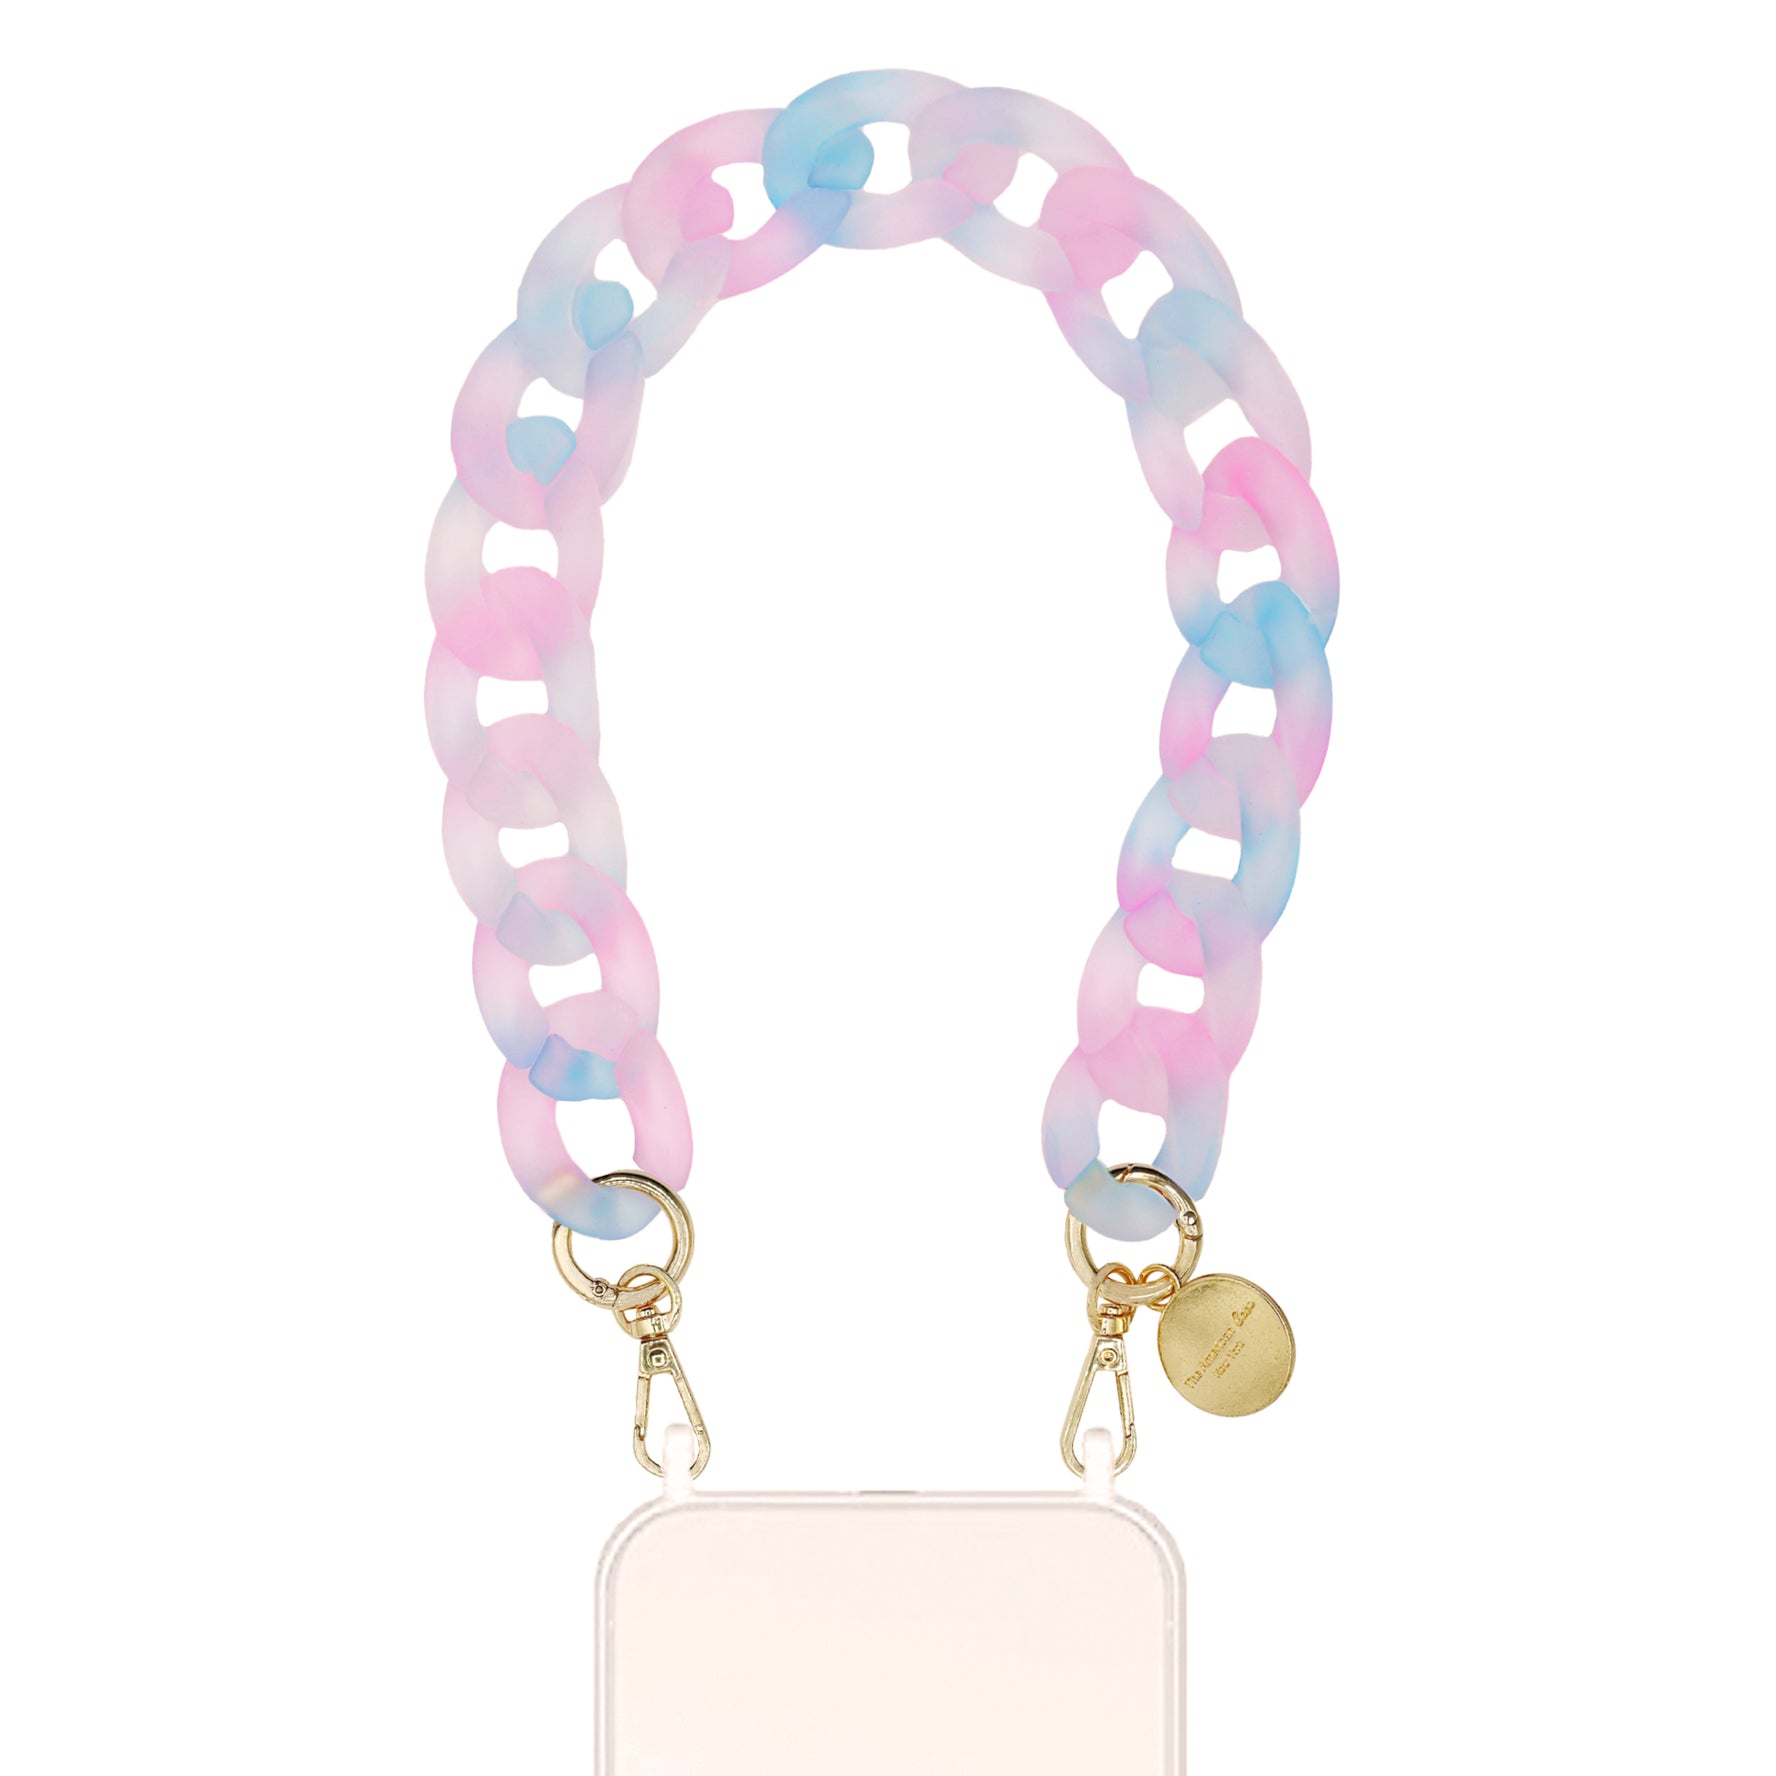 Icy - Resin Link Bracelet Phone Chain With Golden Carabiners